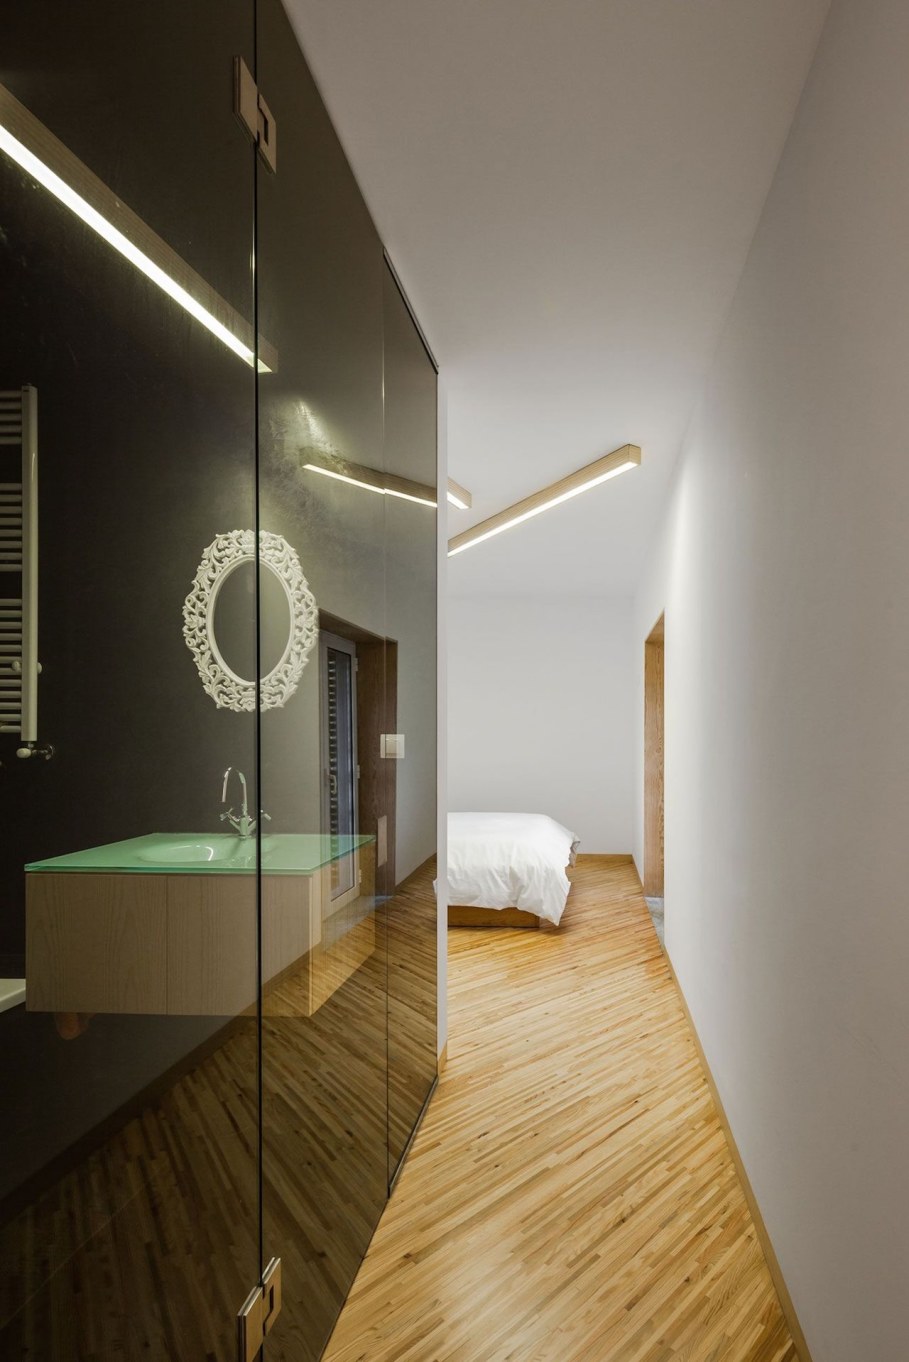 Silver Wood House By Ernesto Pereira - Bedroom